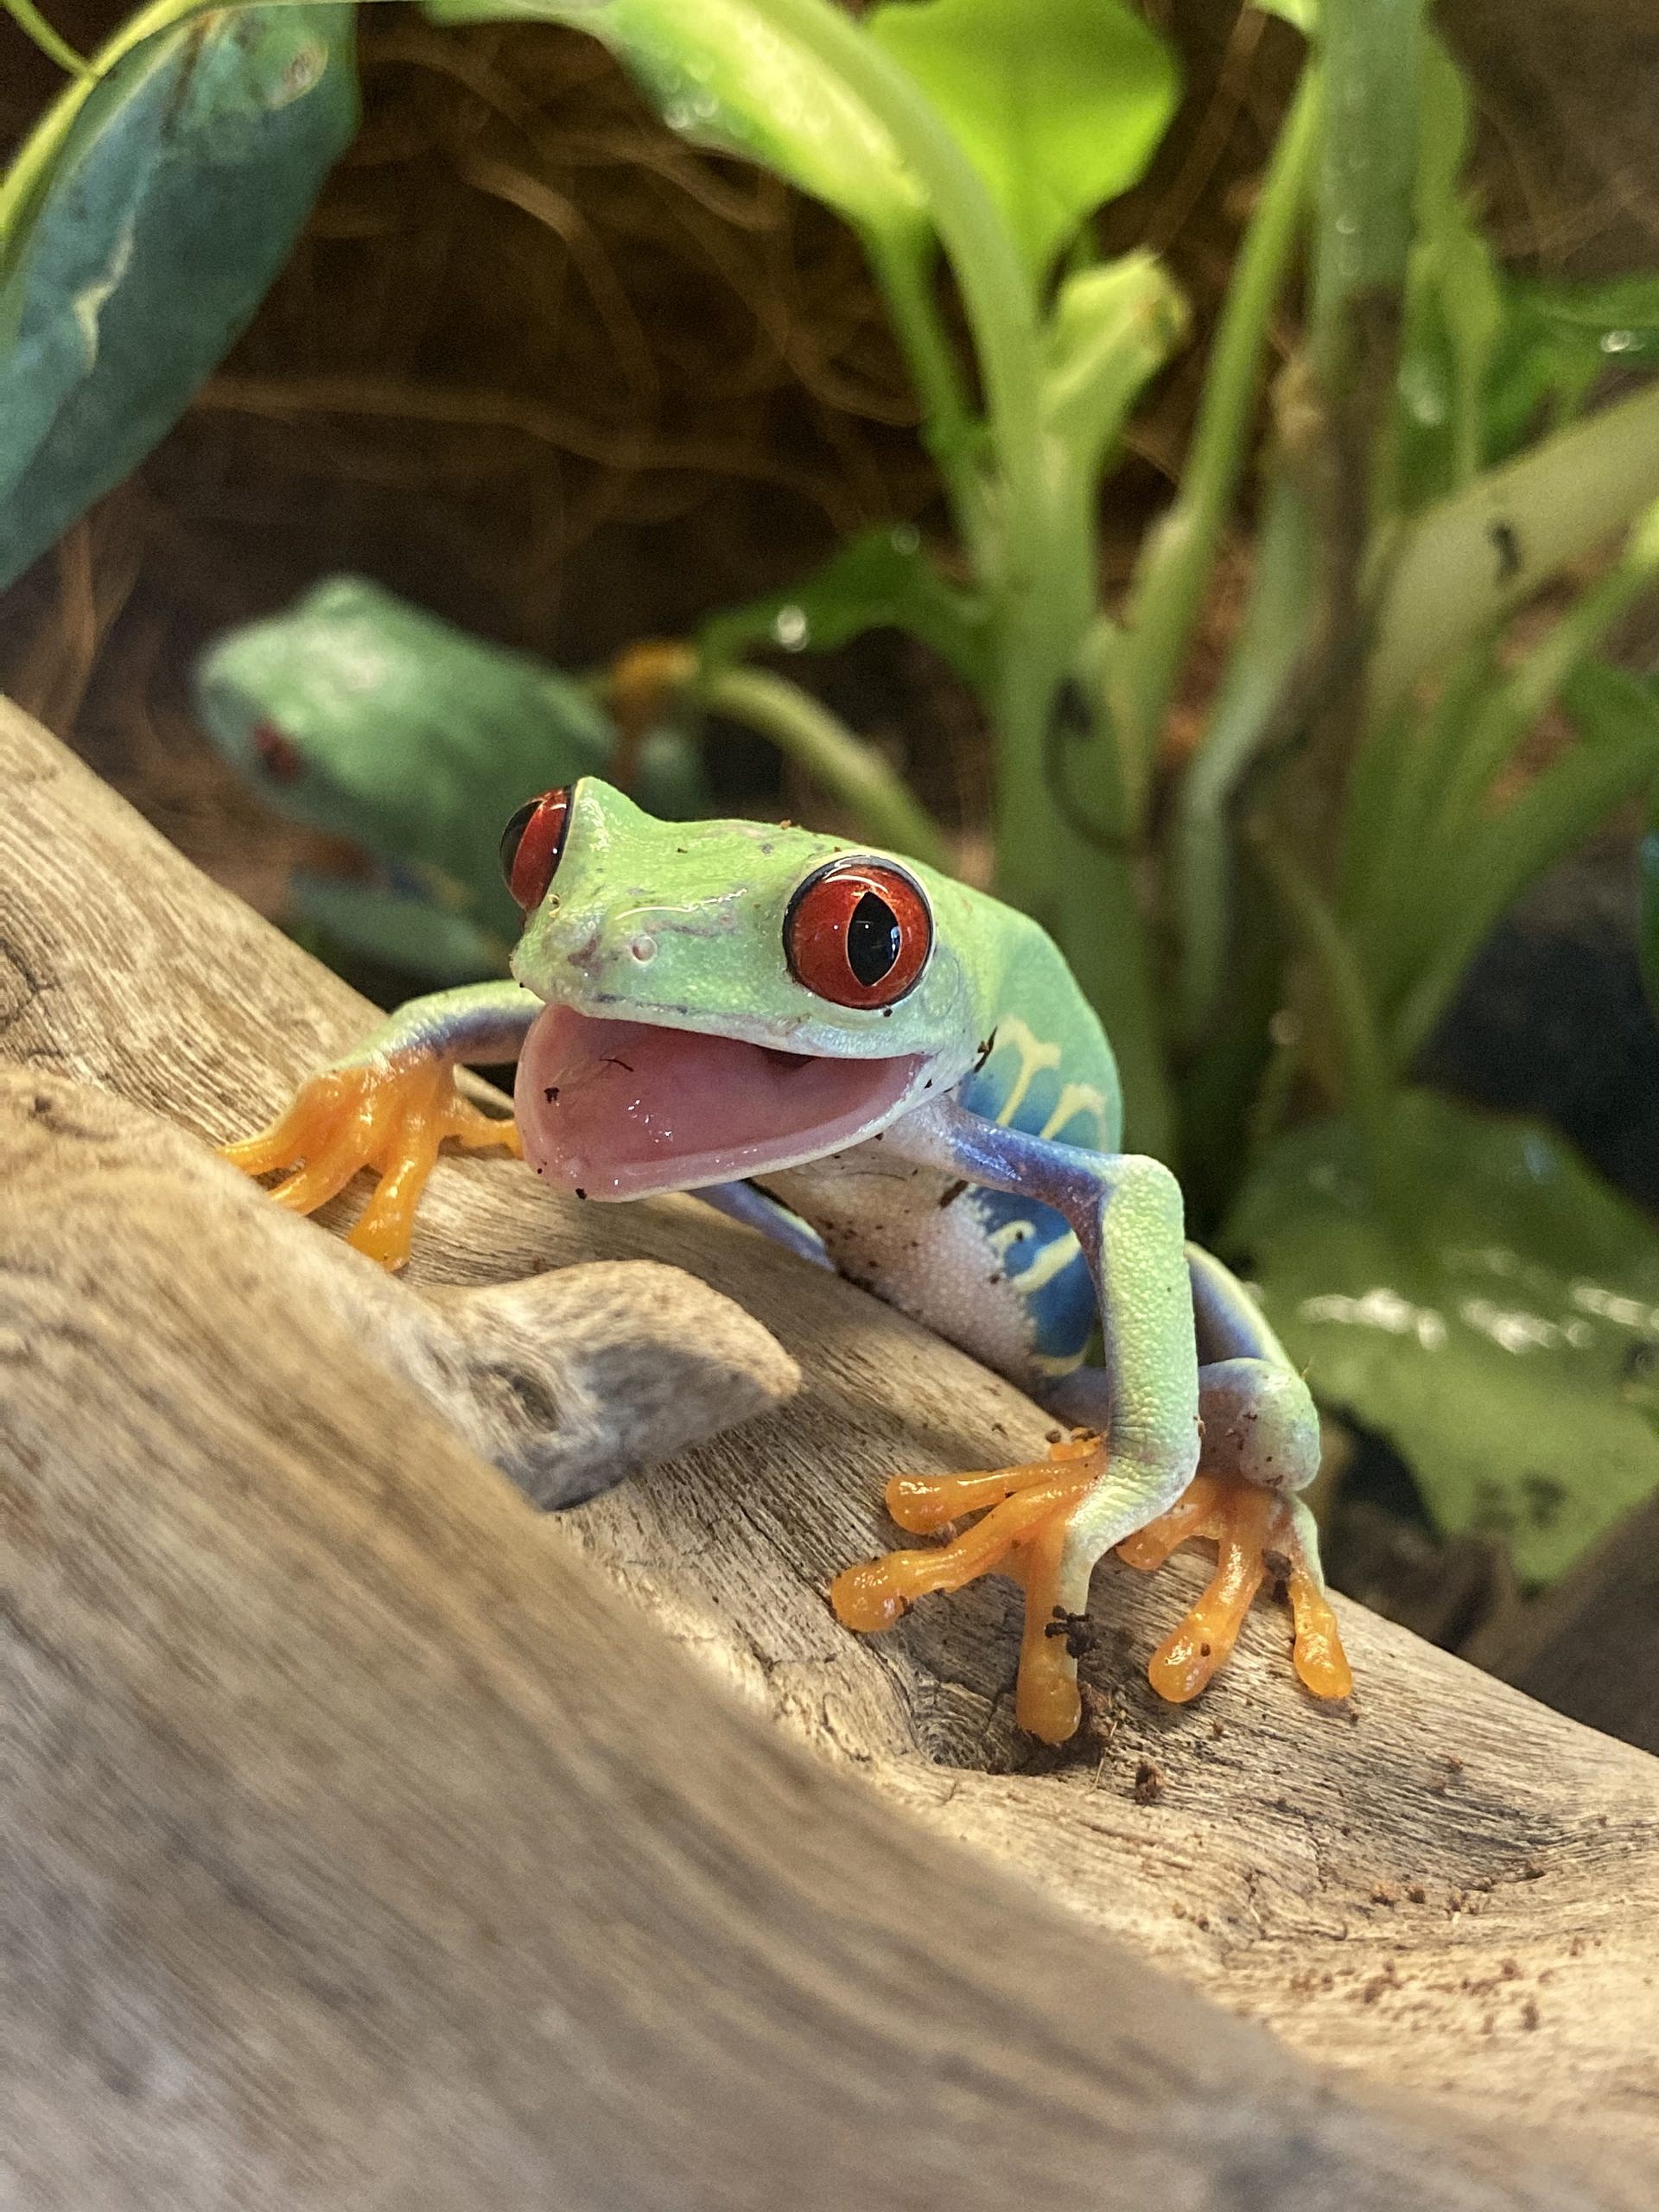 Red-eyed tree frog portrait